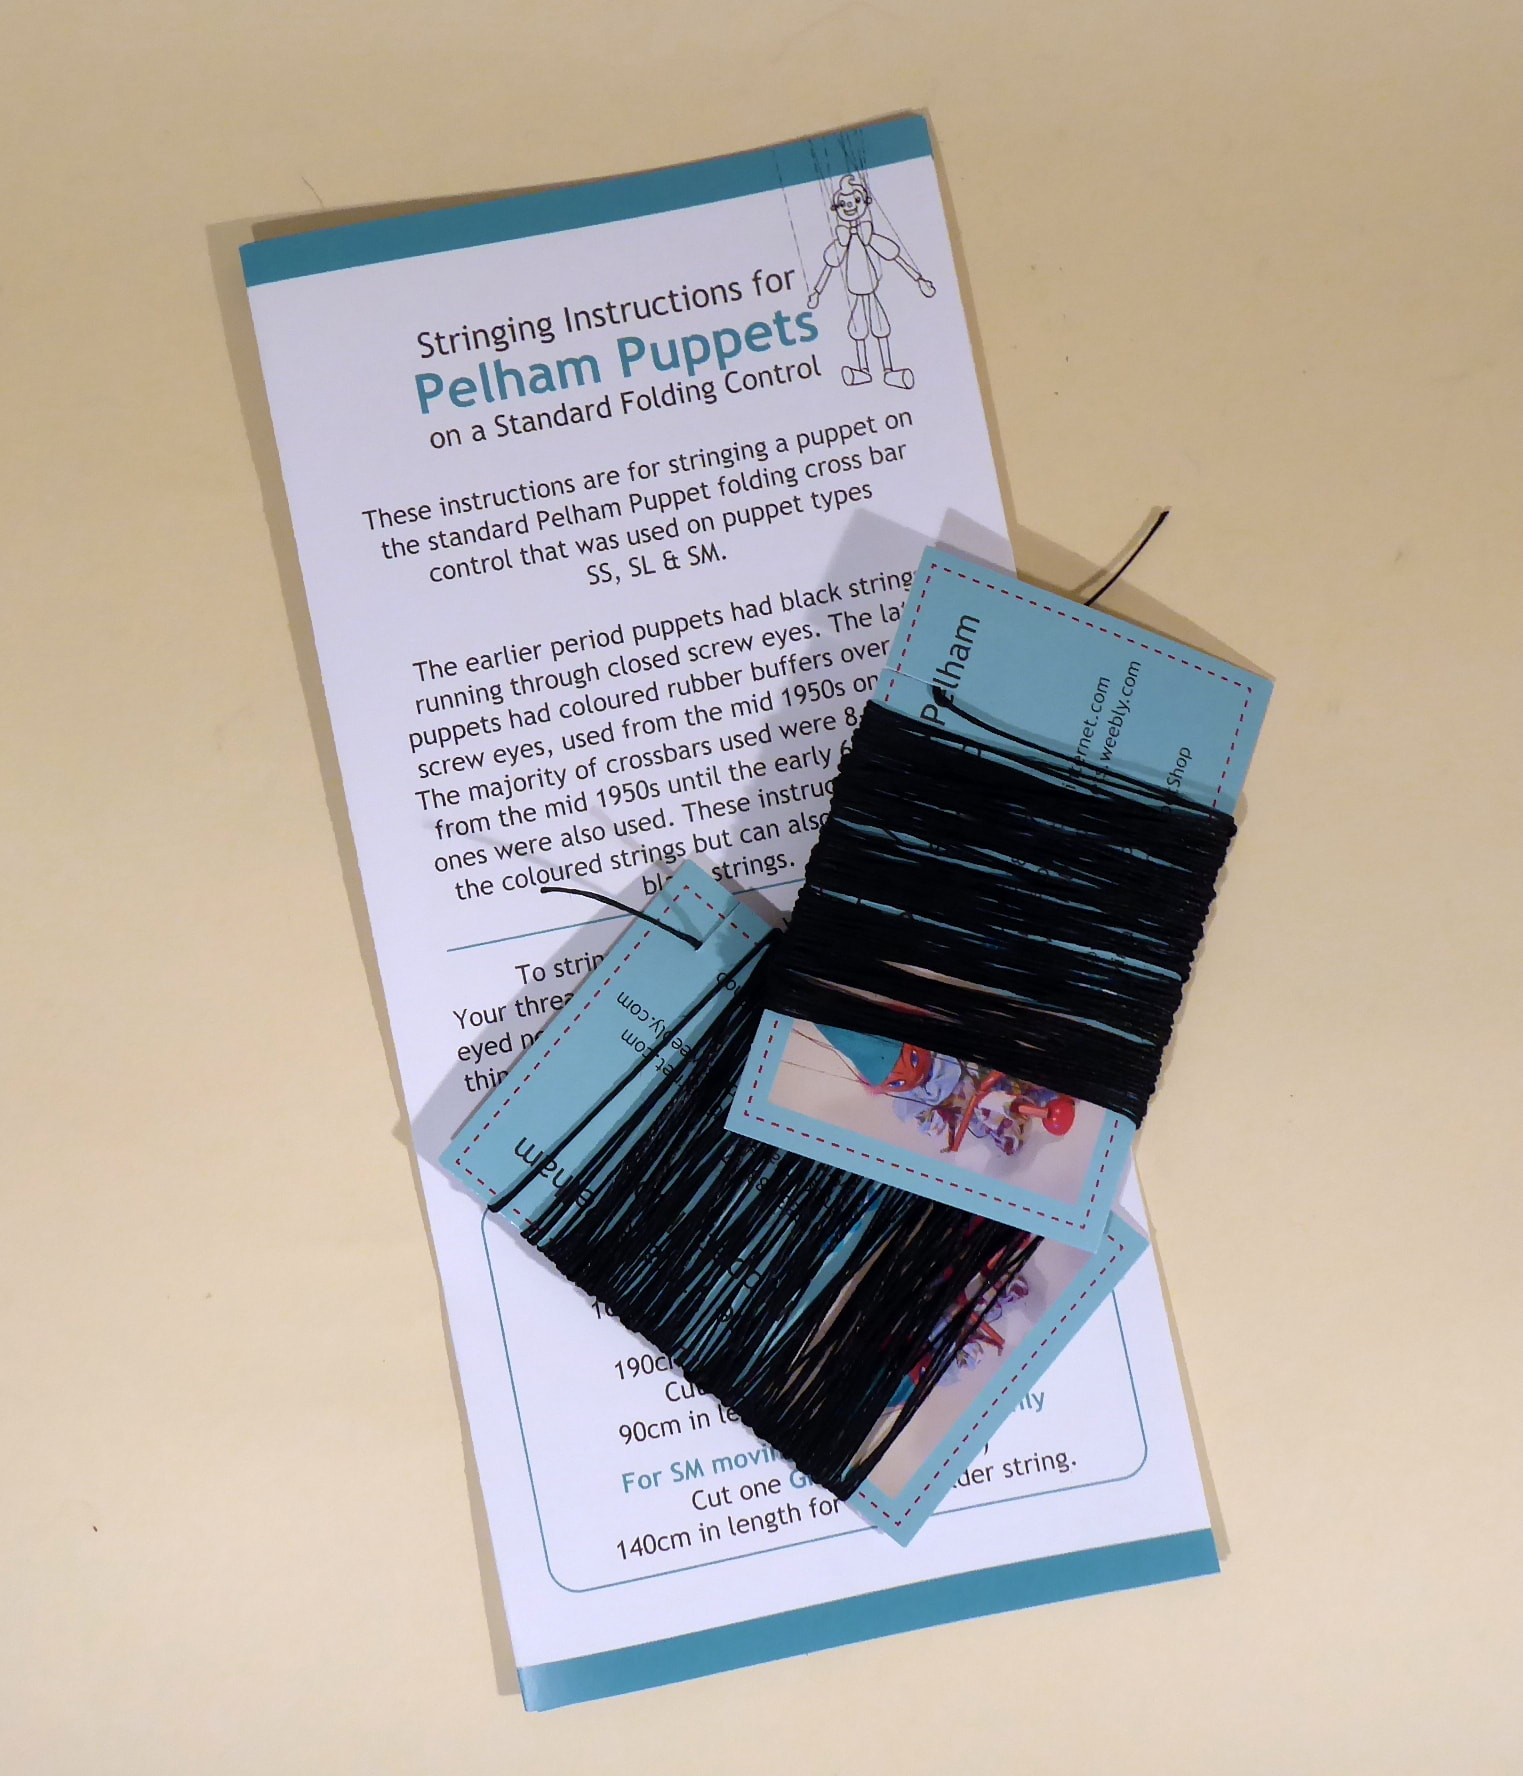 BLACK PUPPET STRINGS FOR 2 PUPPETS AND RESTRINGING INSTRUCTIONS PELHAM PUPPET 